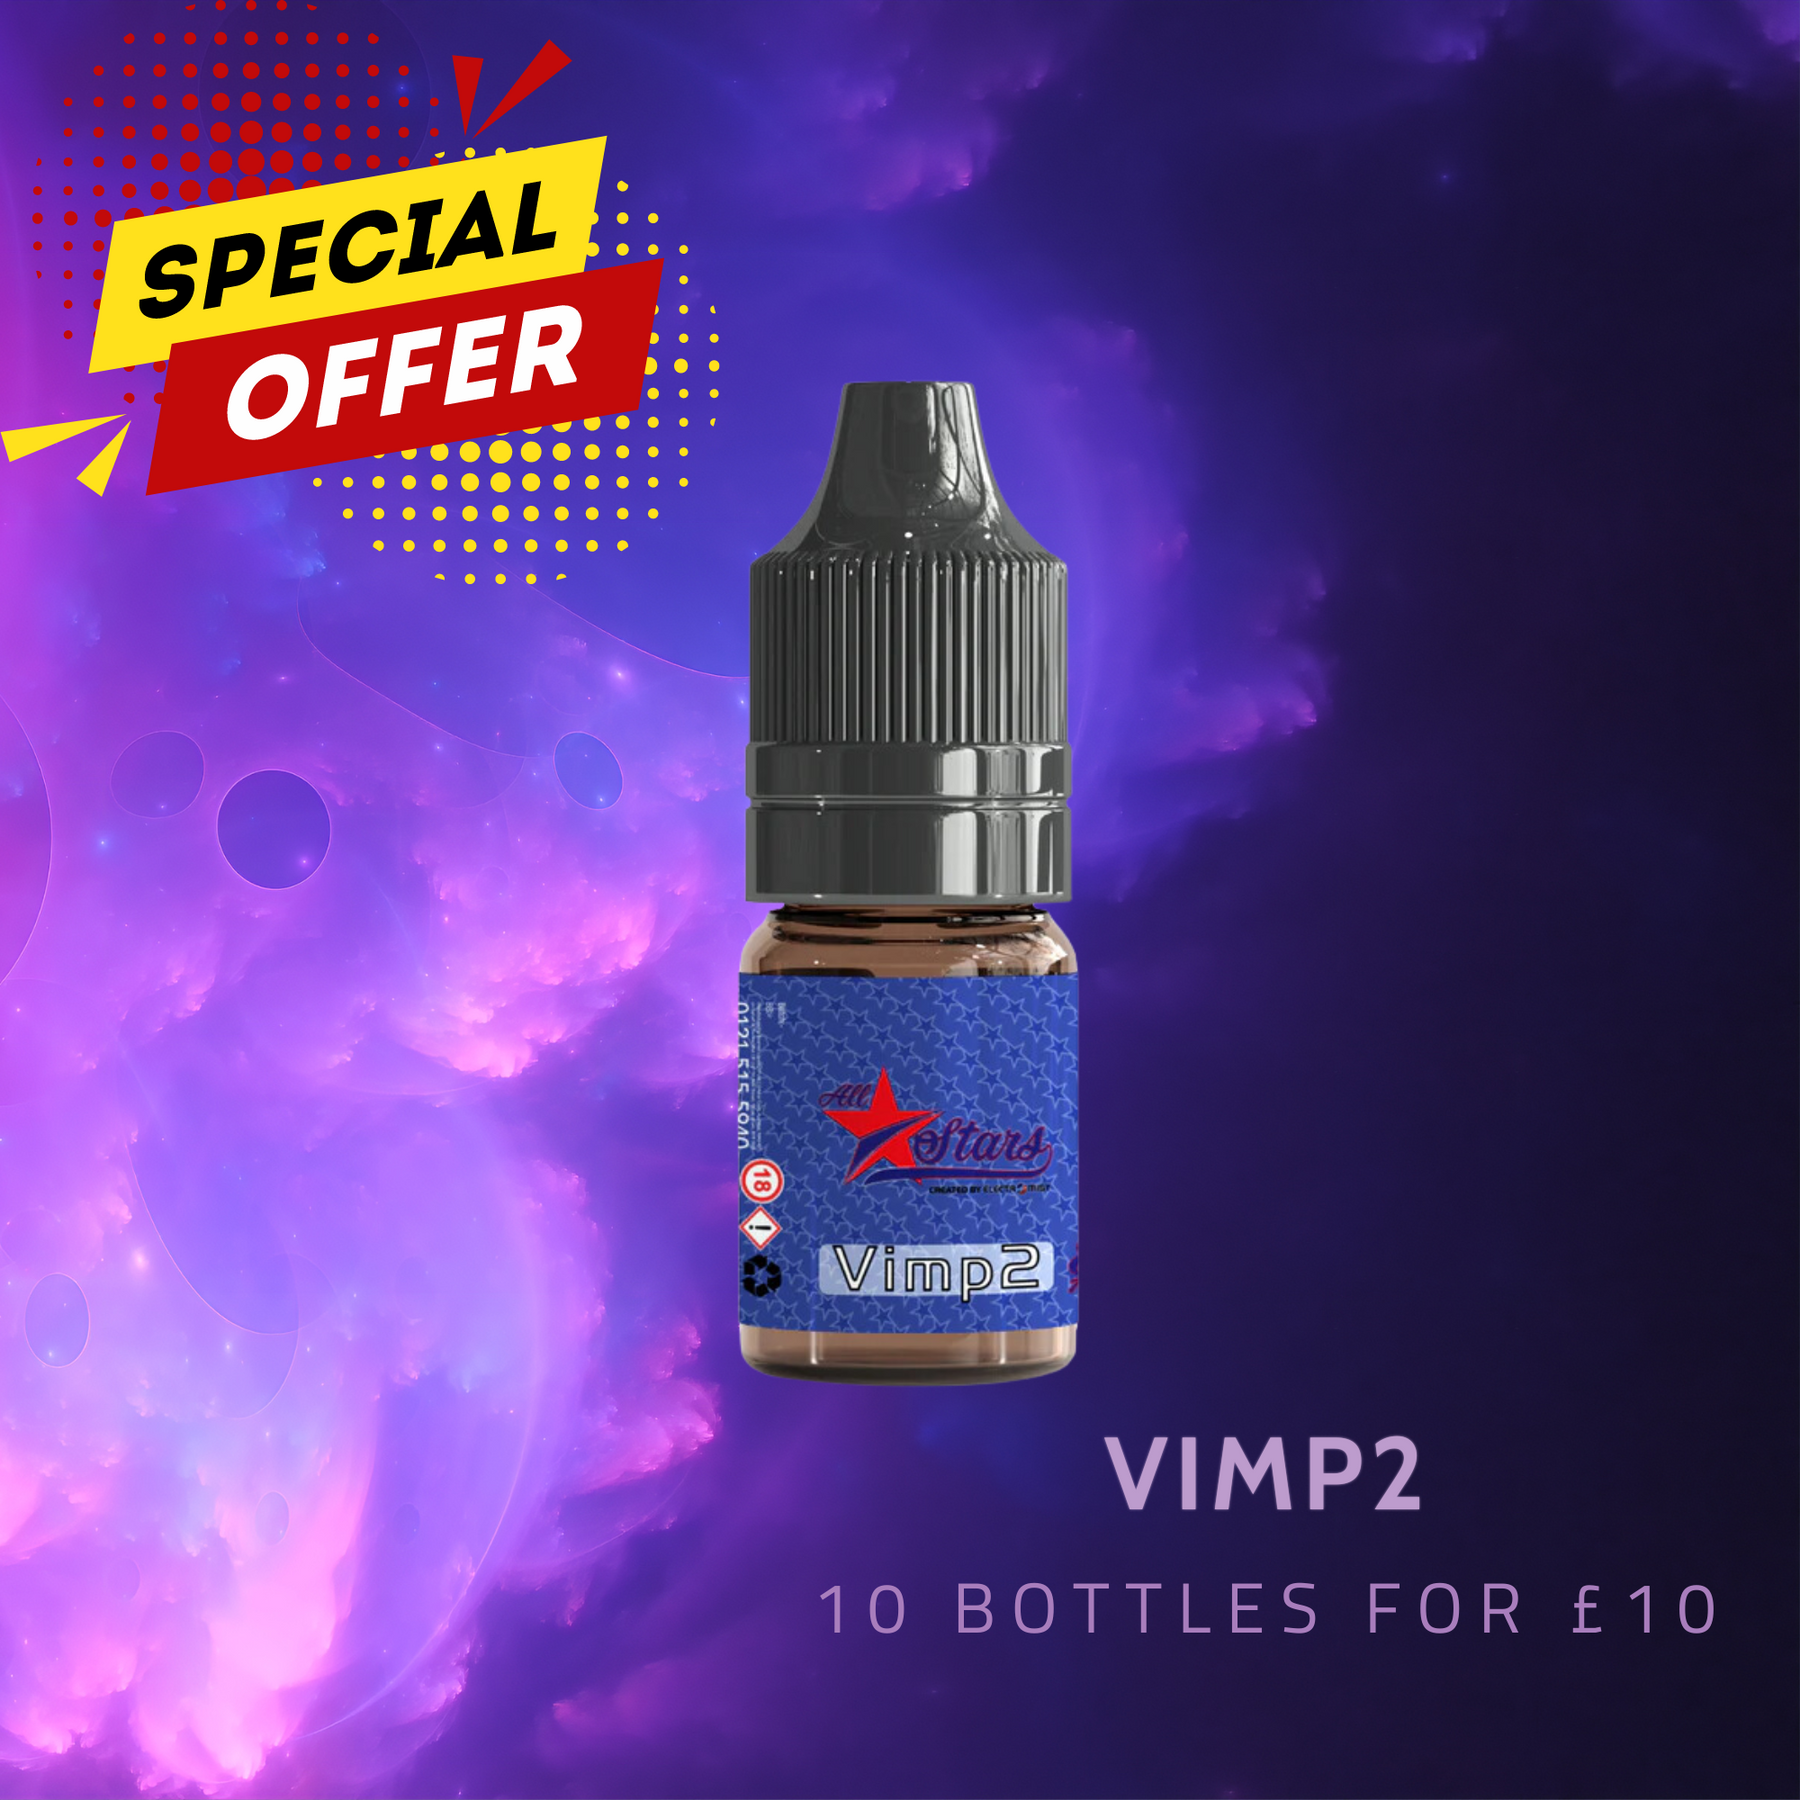 VIMP2 6MG SPECIAL OFFER 10 FOR £10